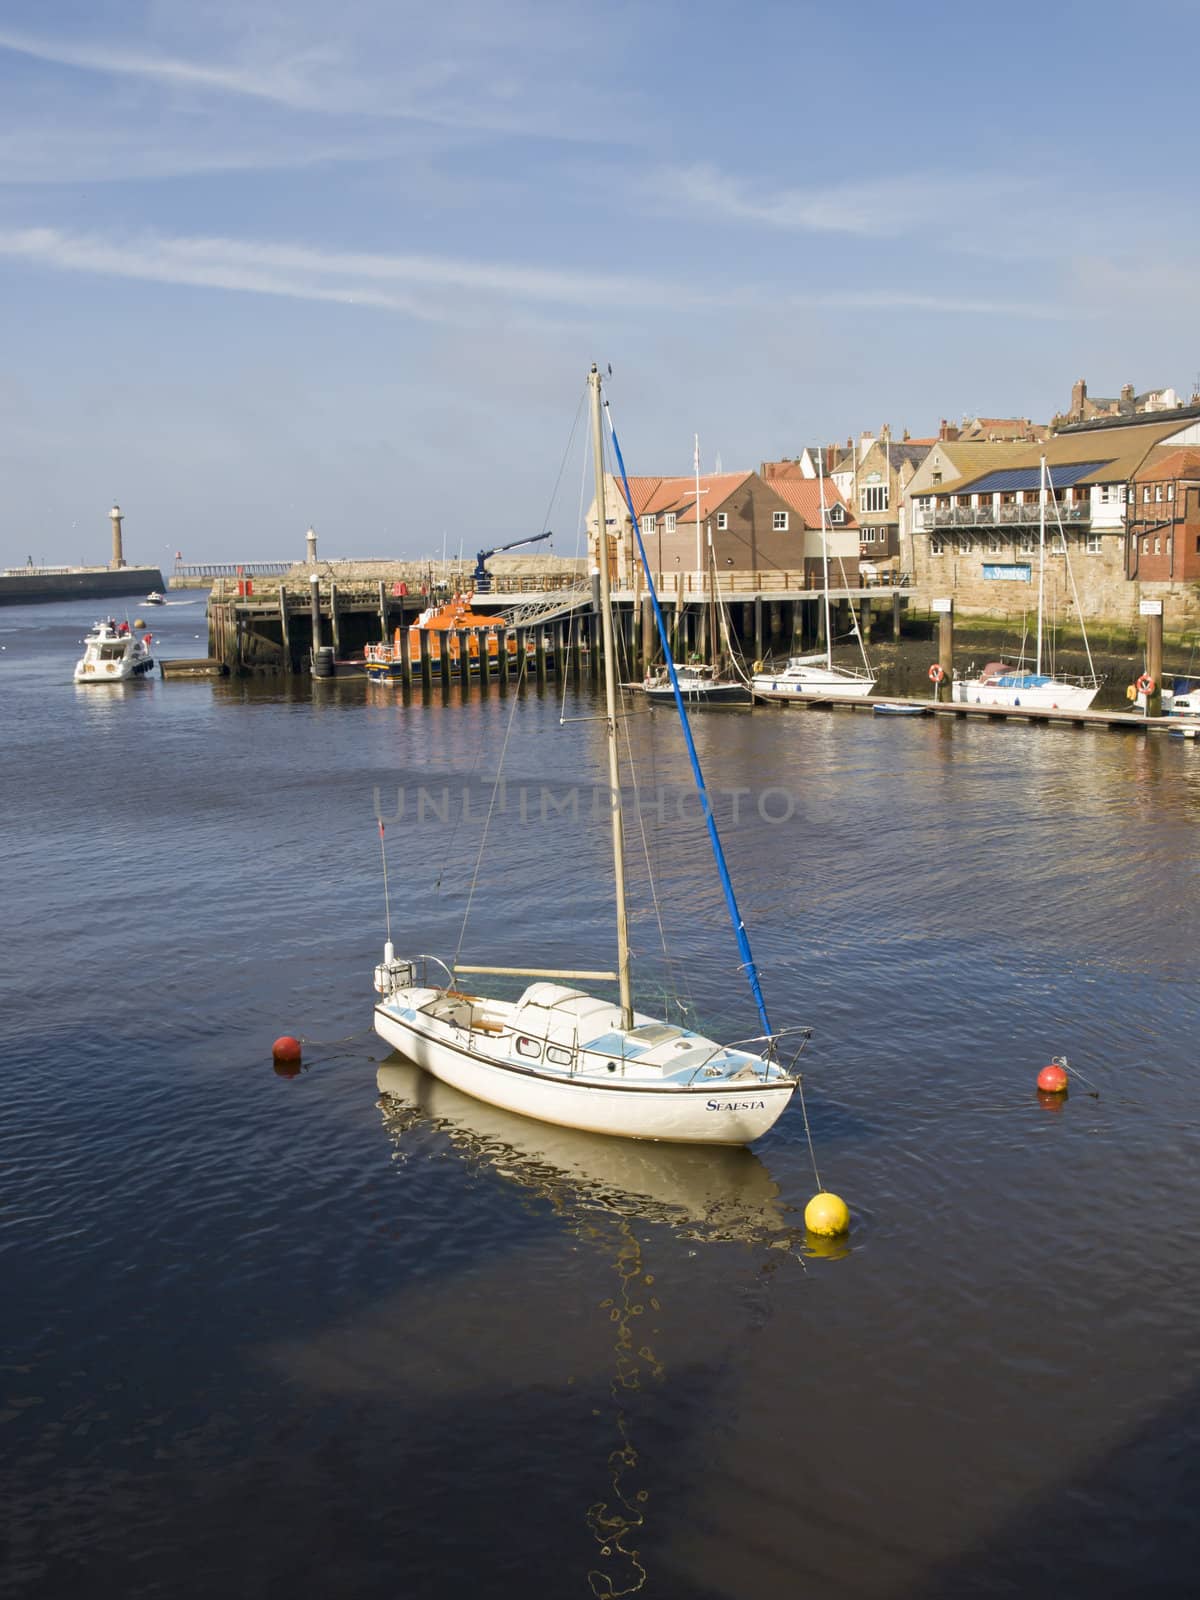 A tranquil scene at Whitby with a boat at rest in the harbour